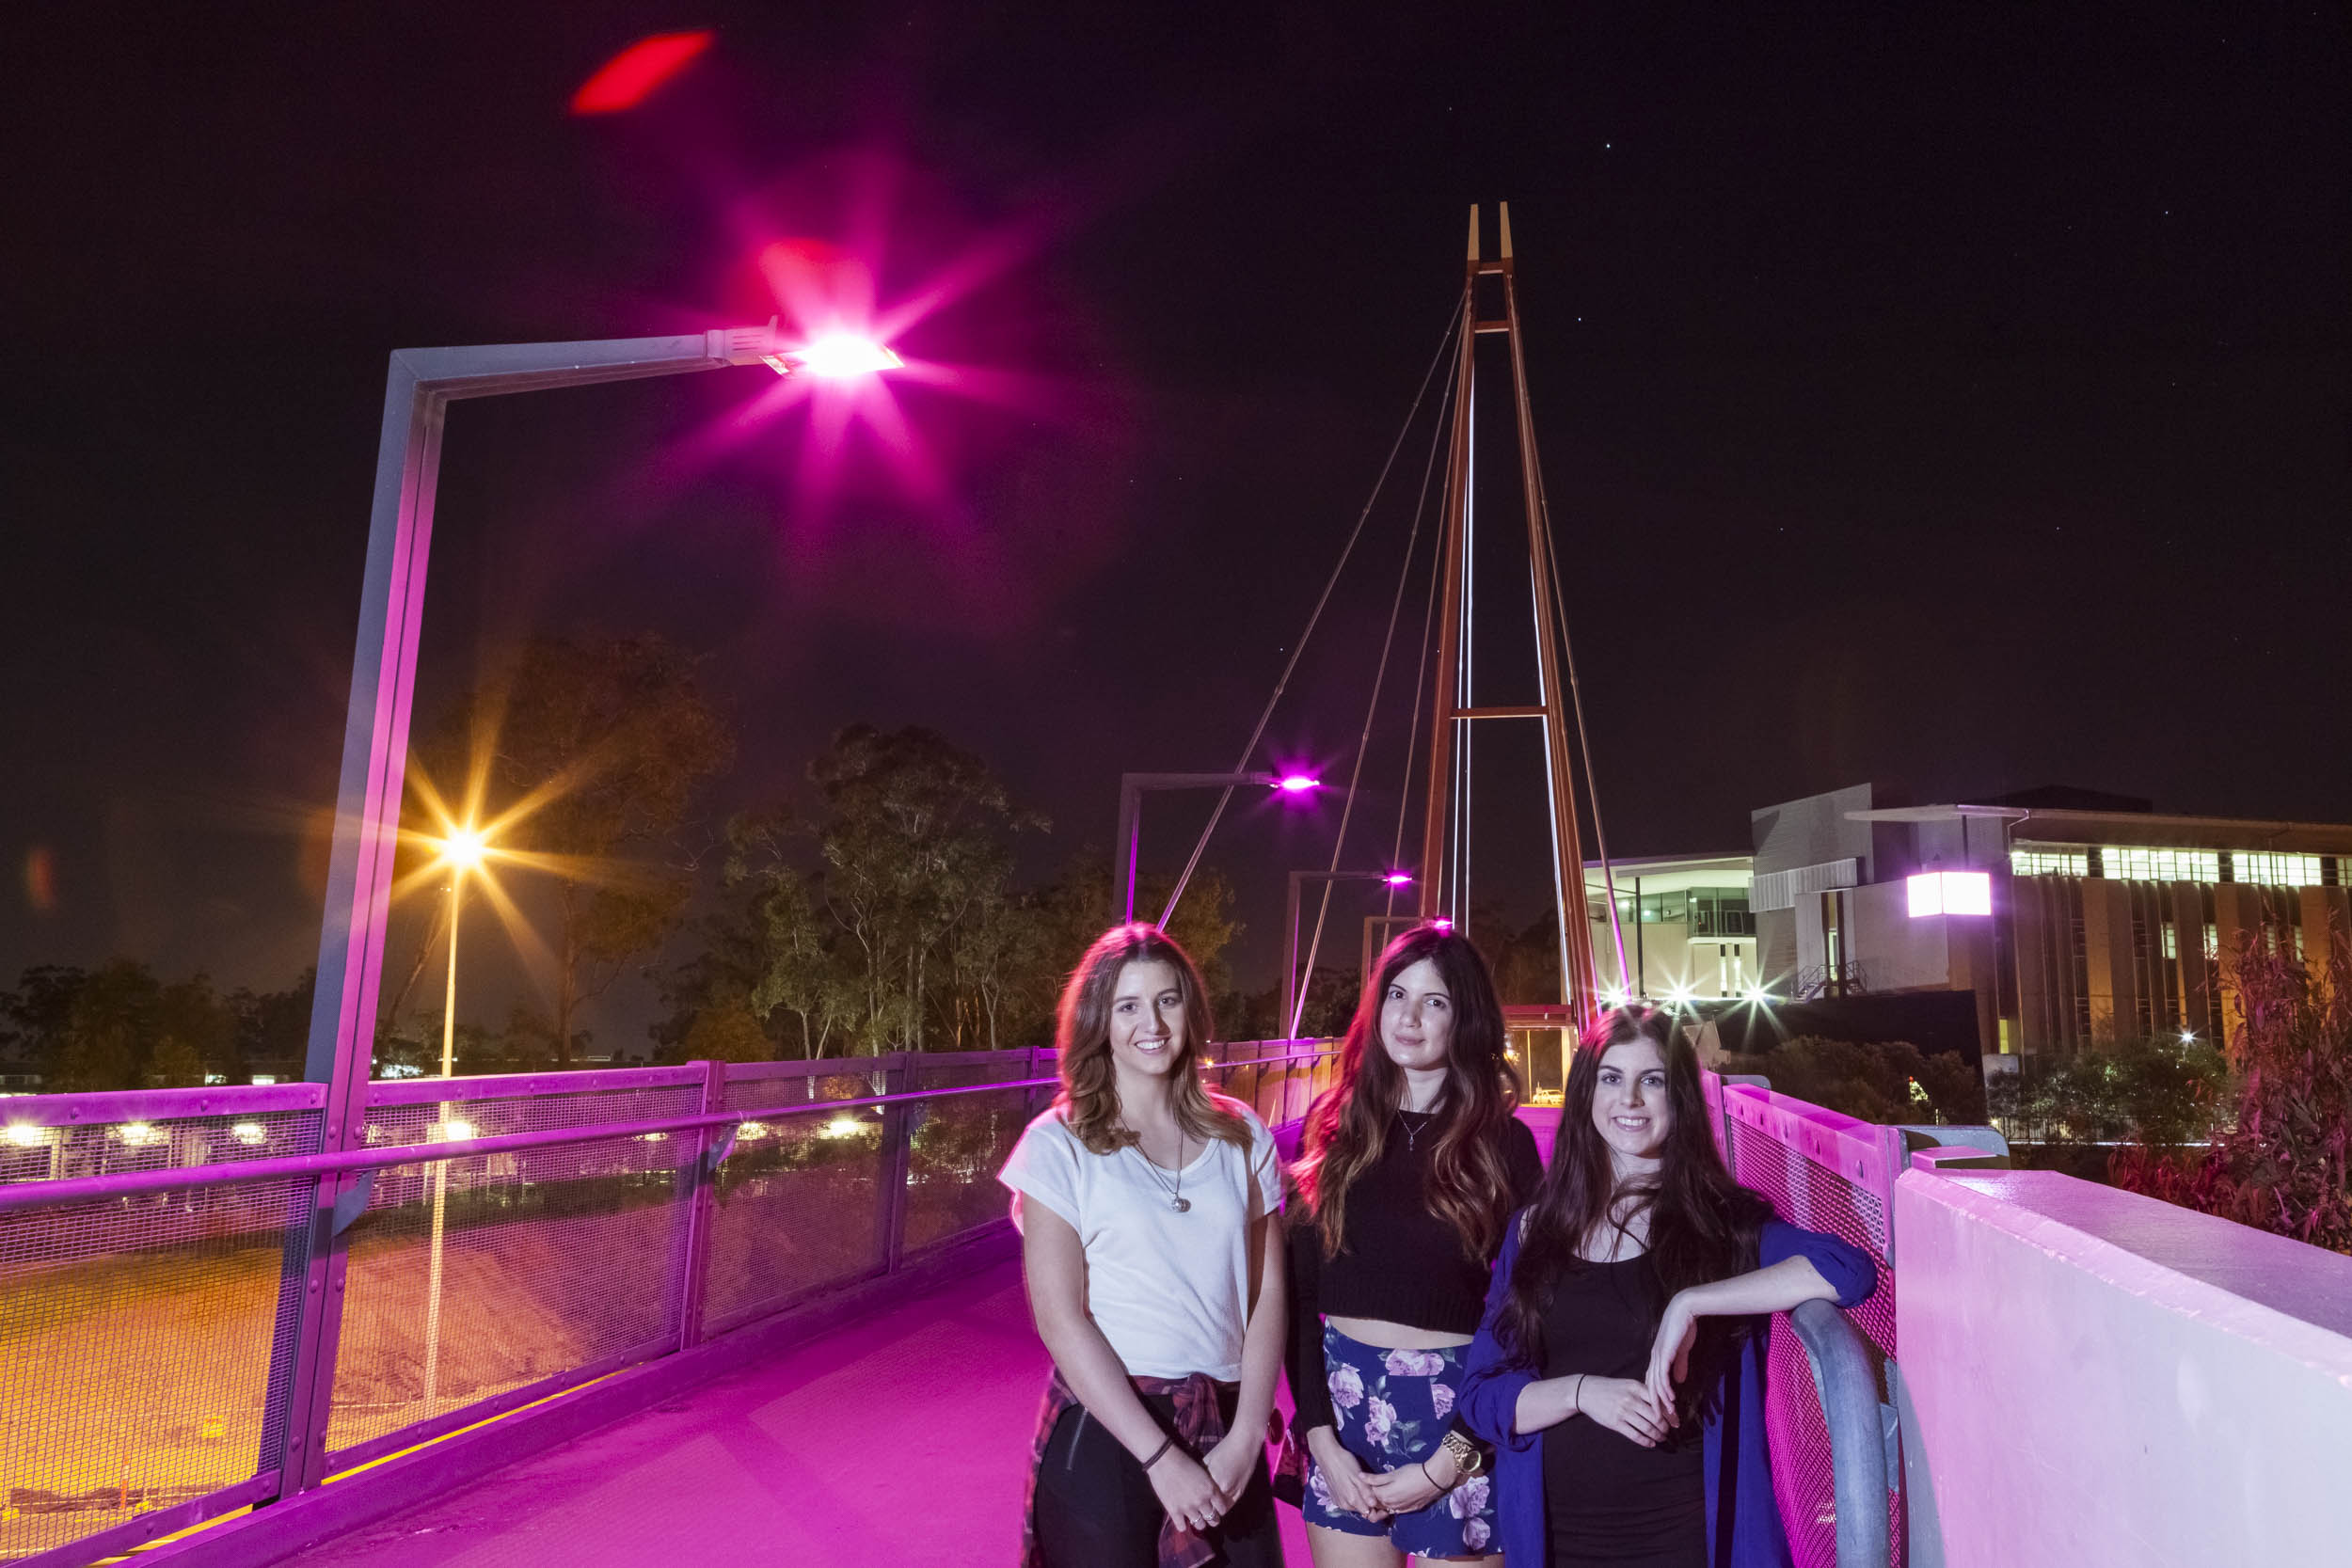 Griffith students, from left, Tayela Petterwood, Bianca Serrano and Isabella Rosson take a stroll across the Smith Street bridge, lit pink for Breast Cancer Awareness Month